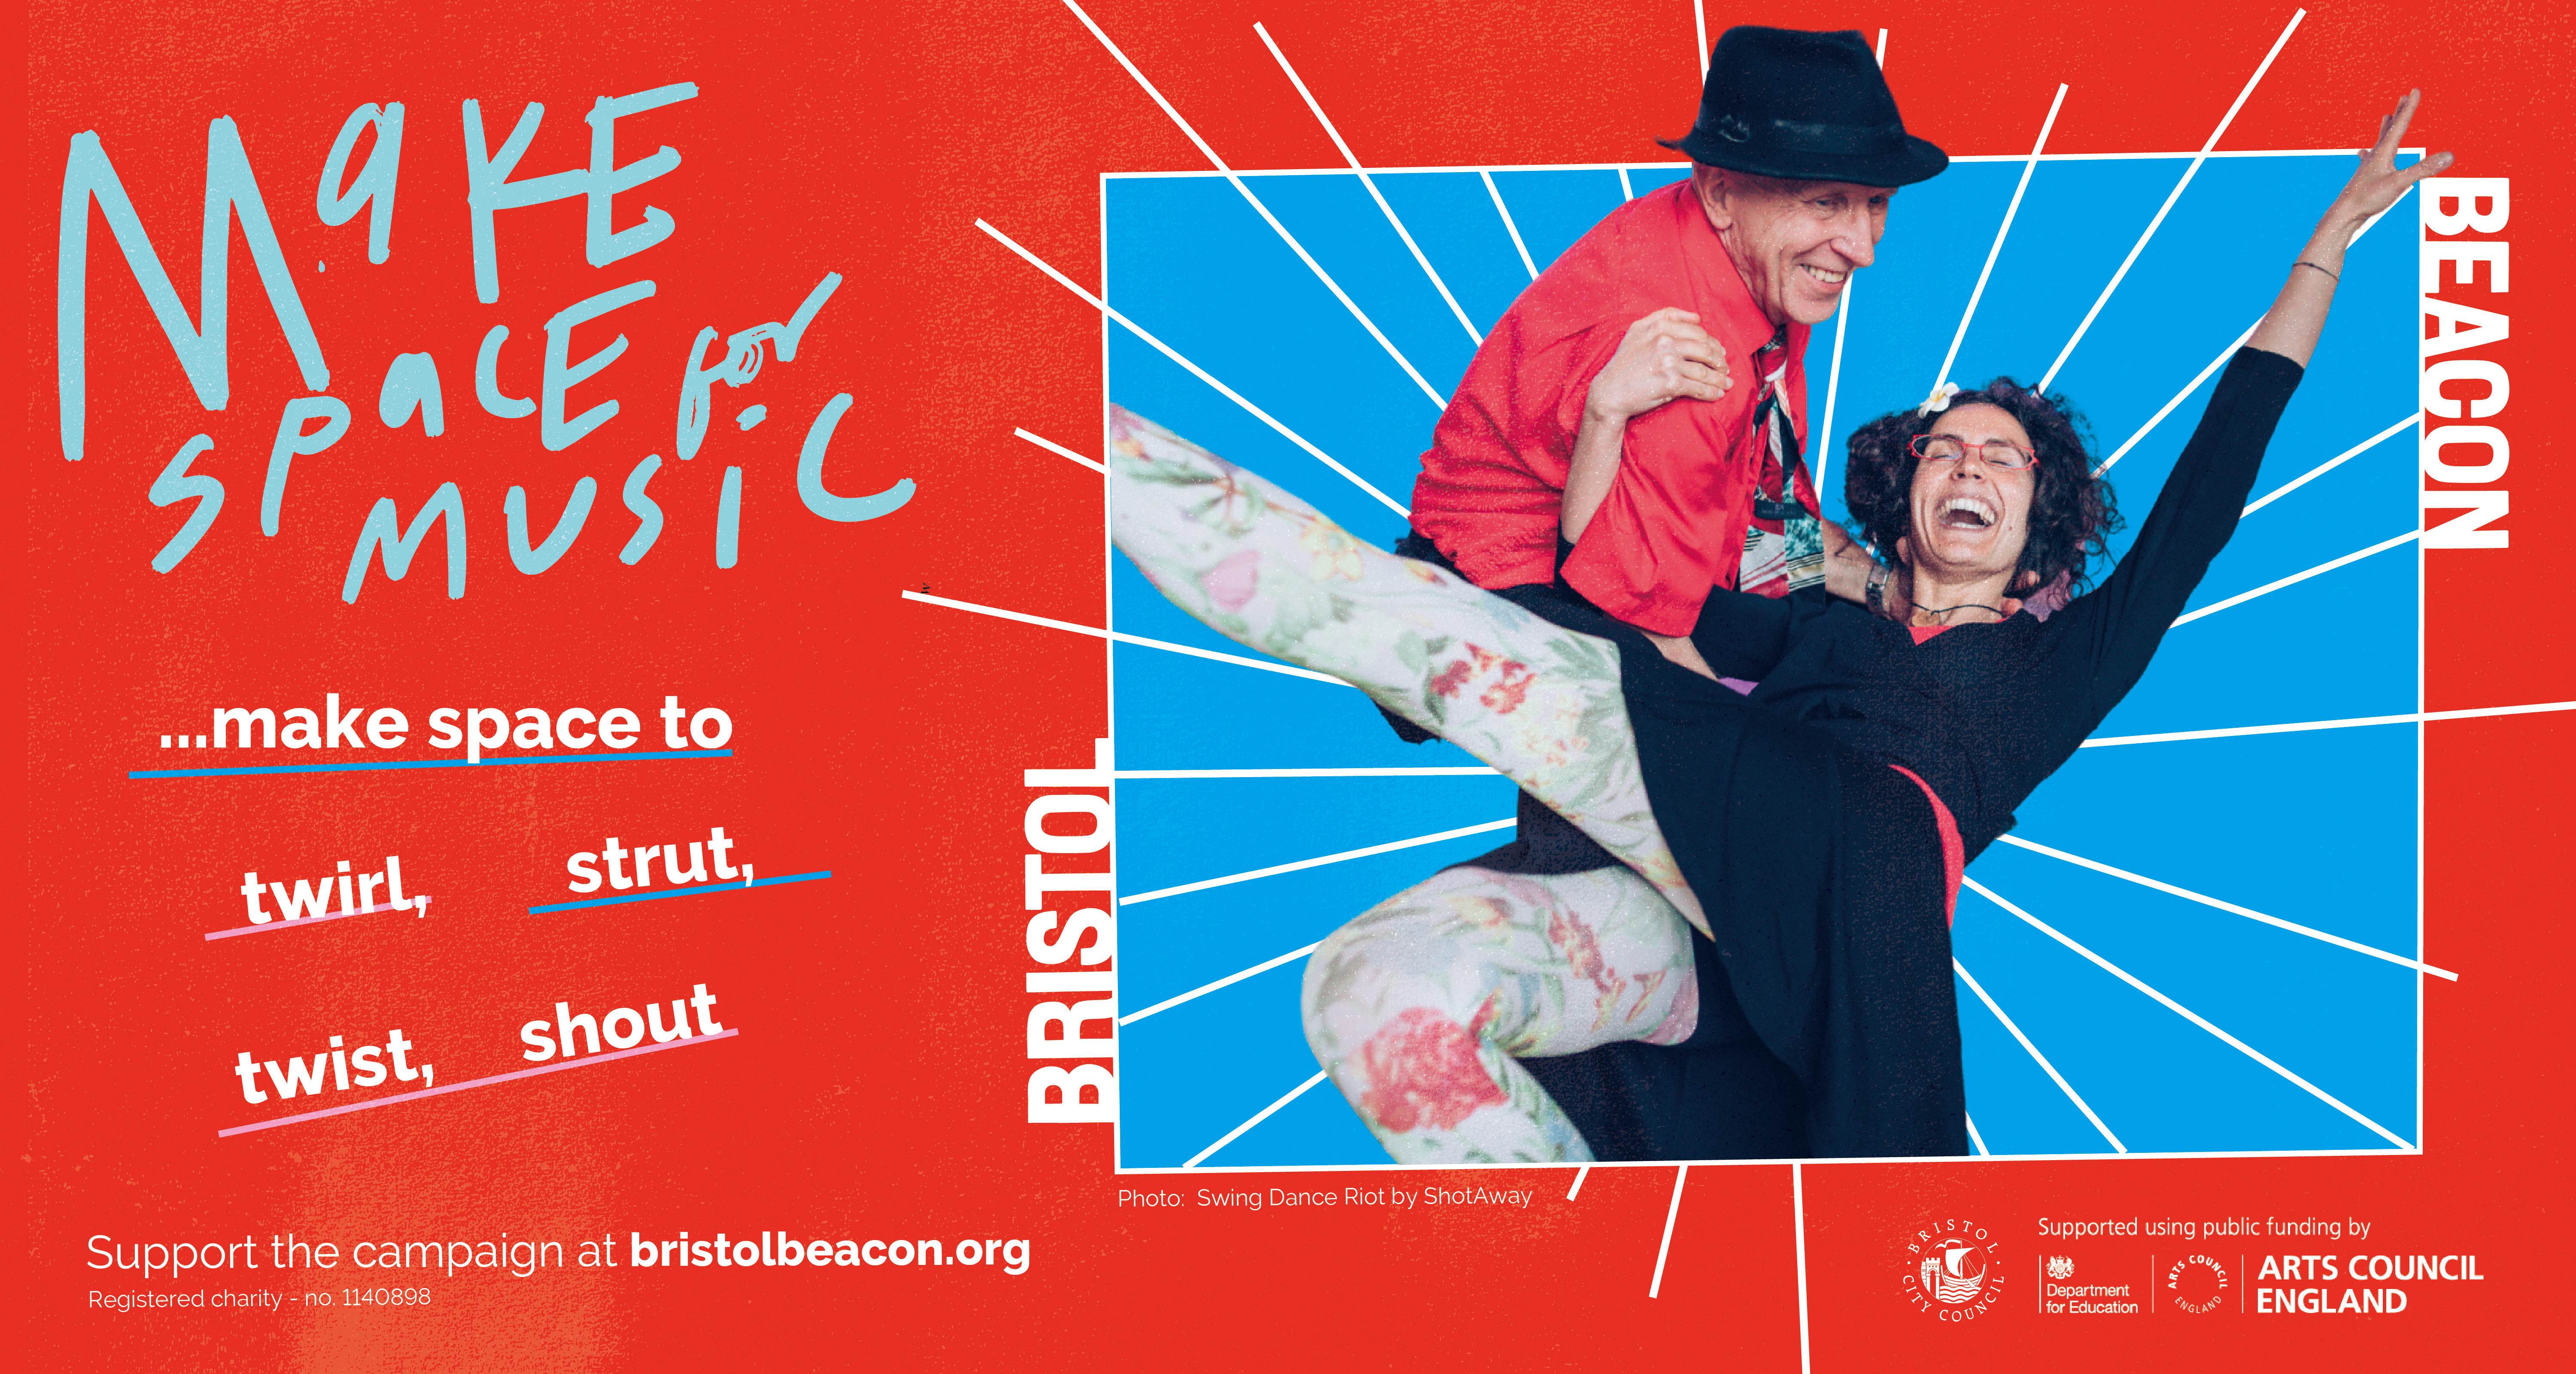 Bristol Beacon reveals new look and vision to help everyone in Bristol ‘make space for music’